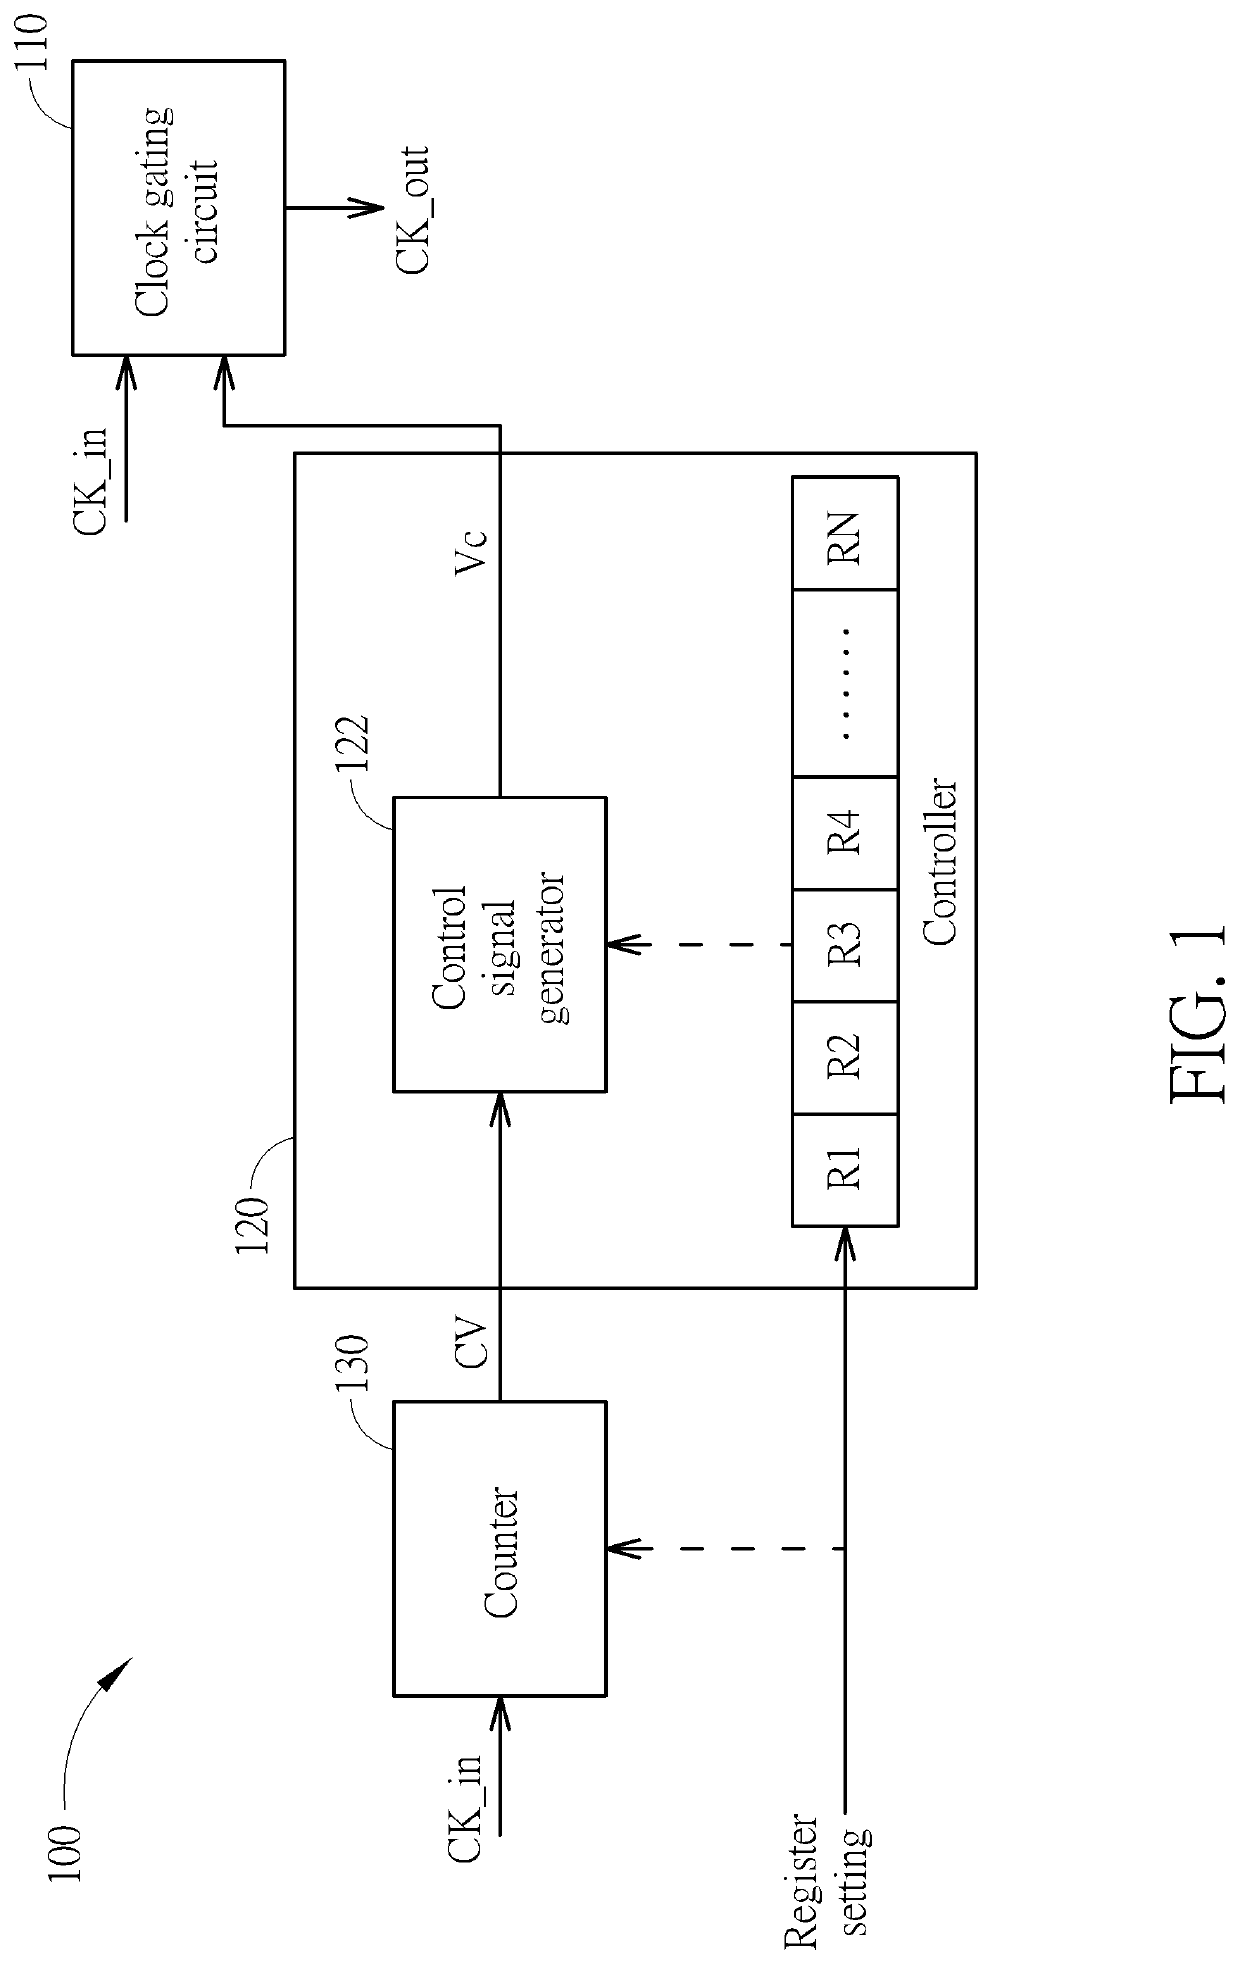 Fractional frequency divider and flash memory controller